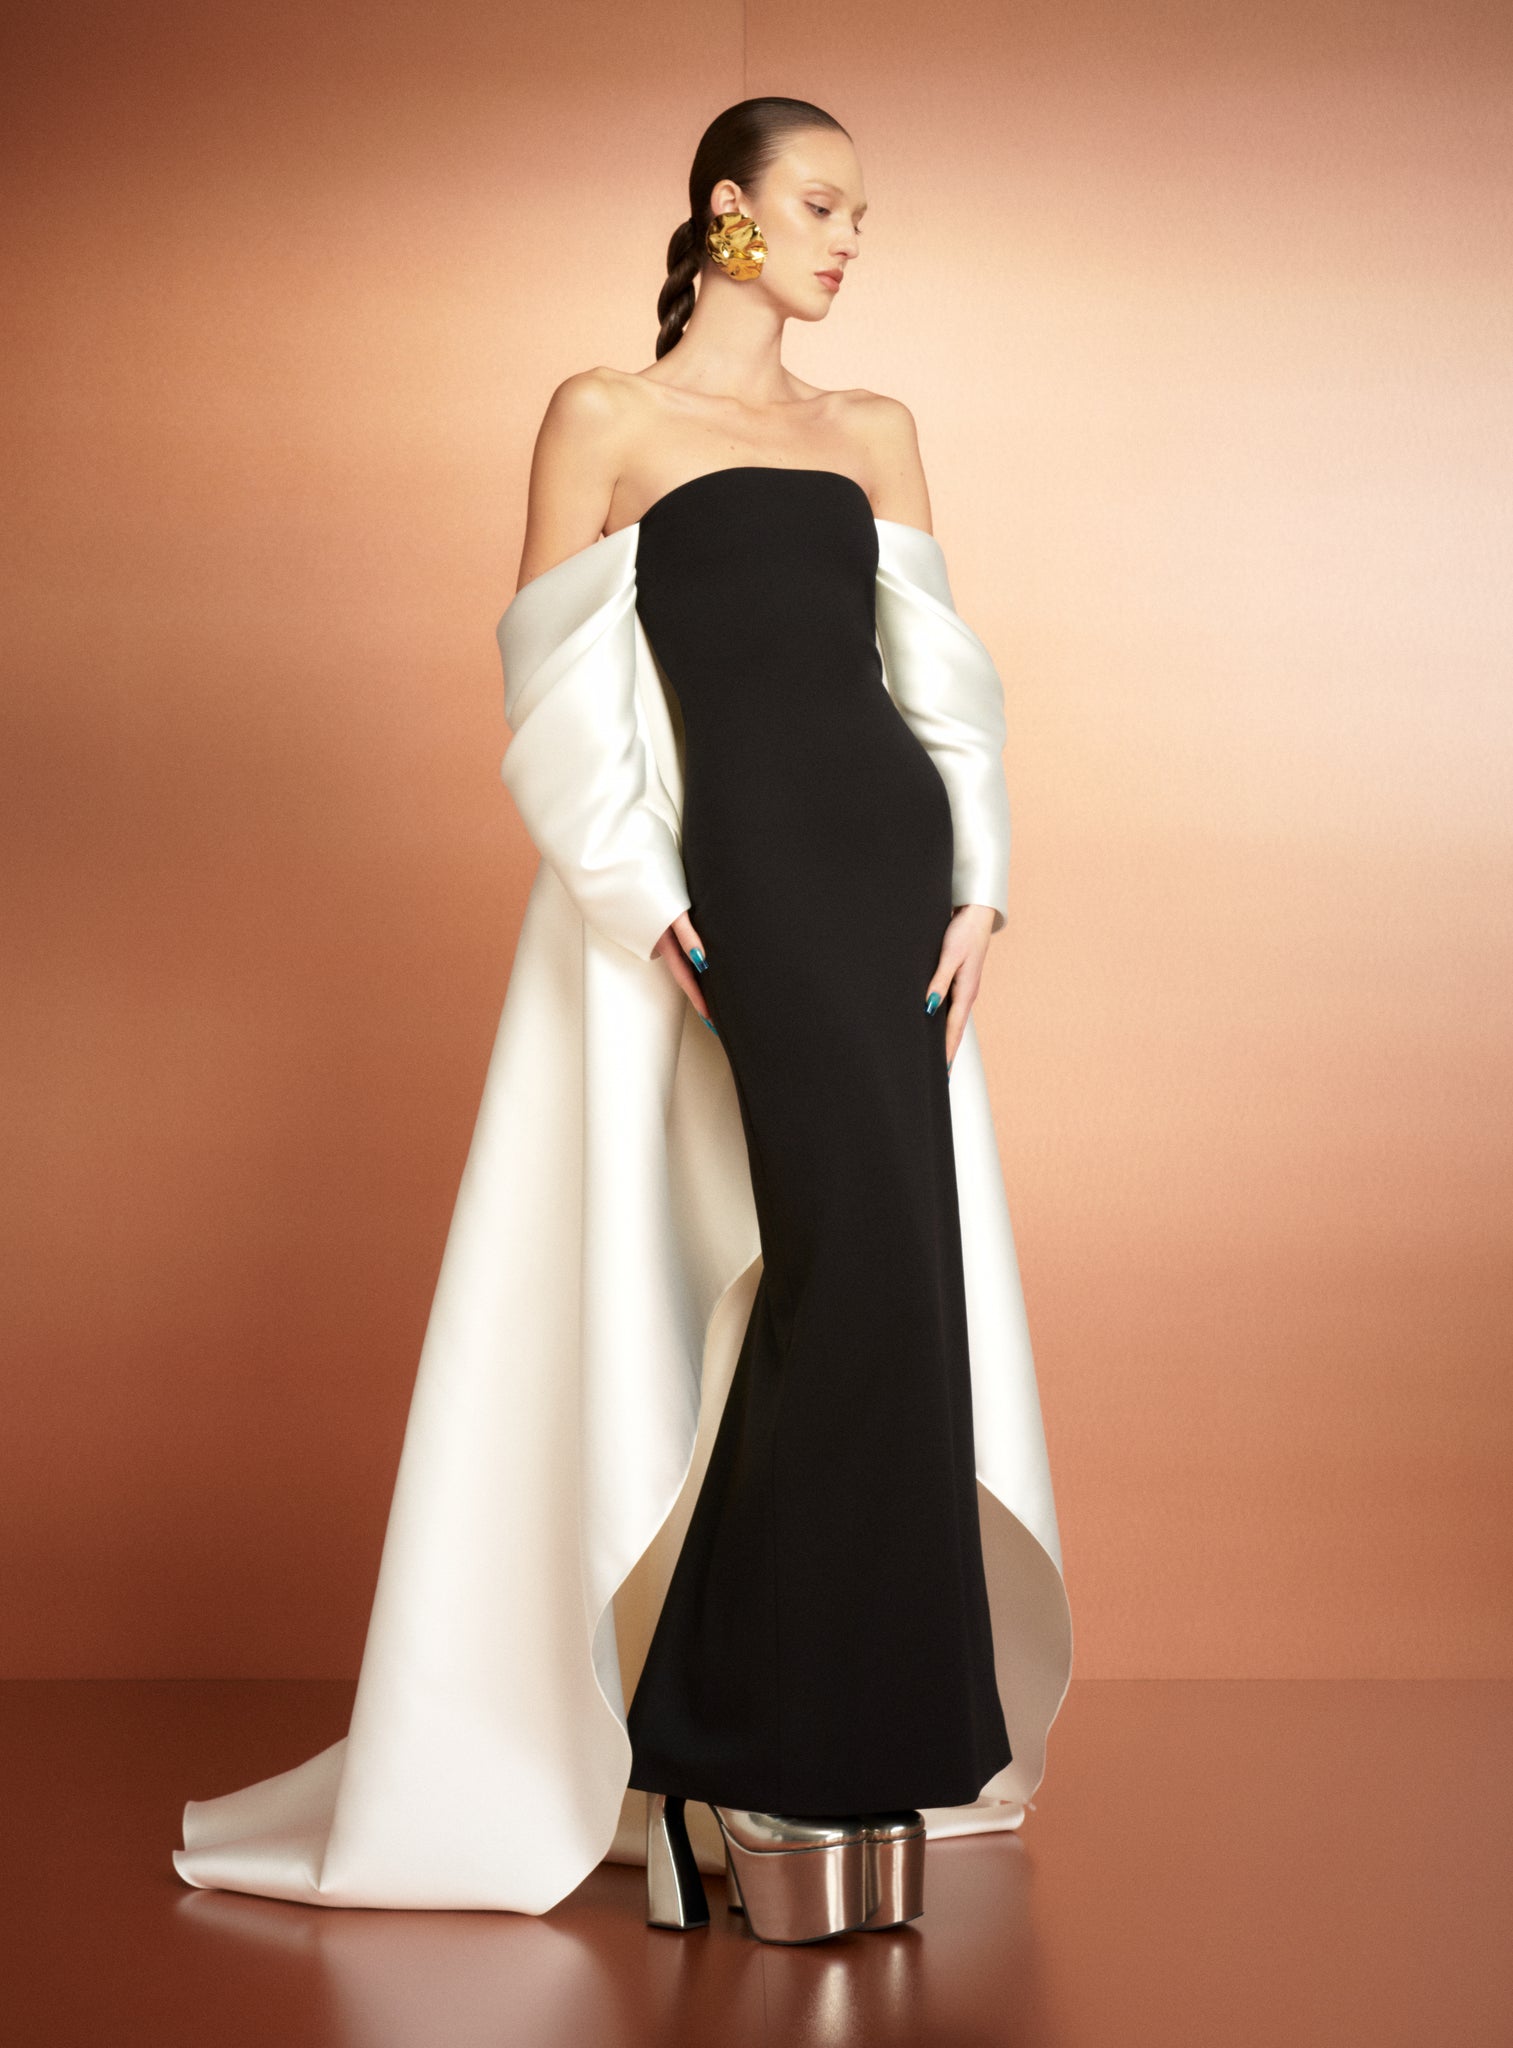 The Kyla Maxi Dress in Black and Cream